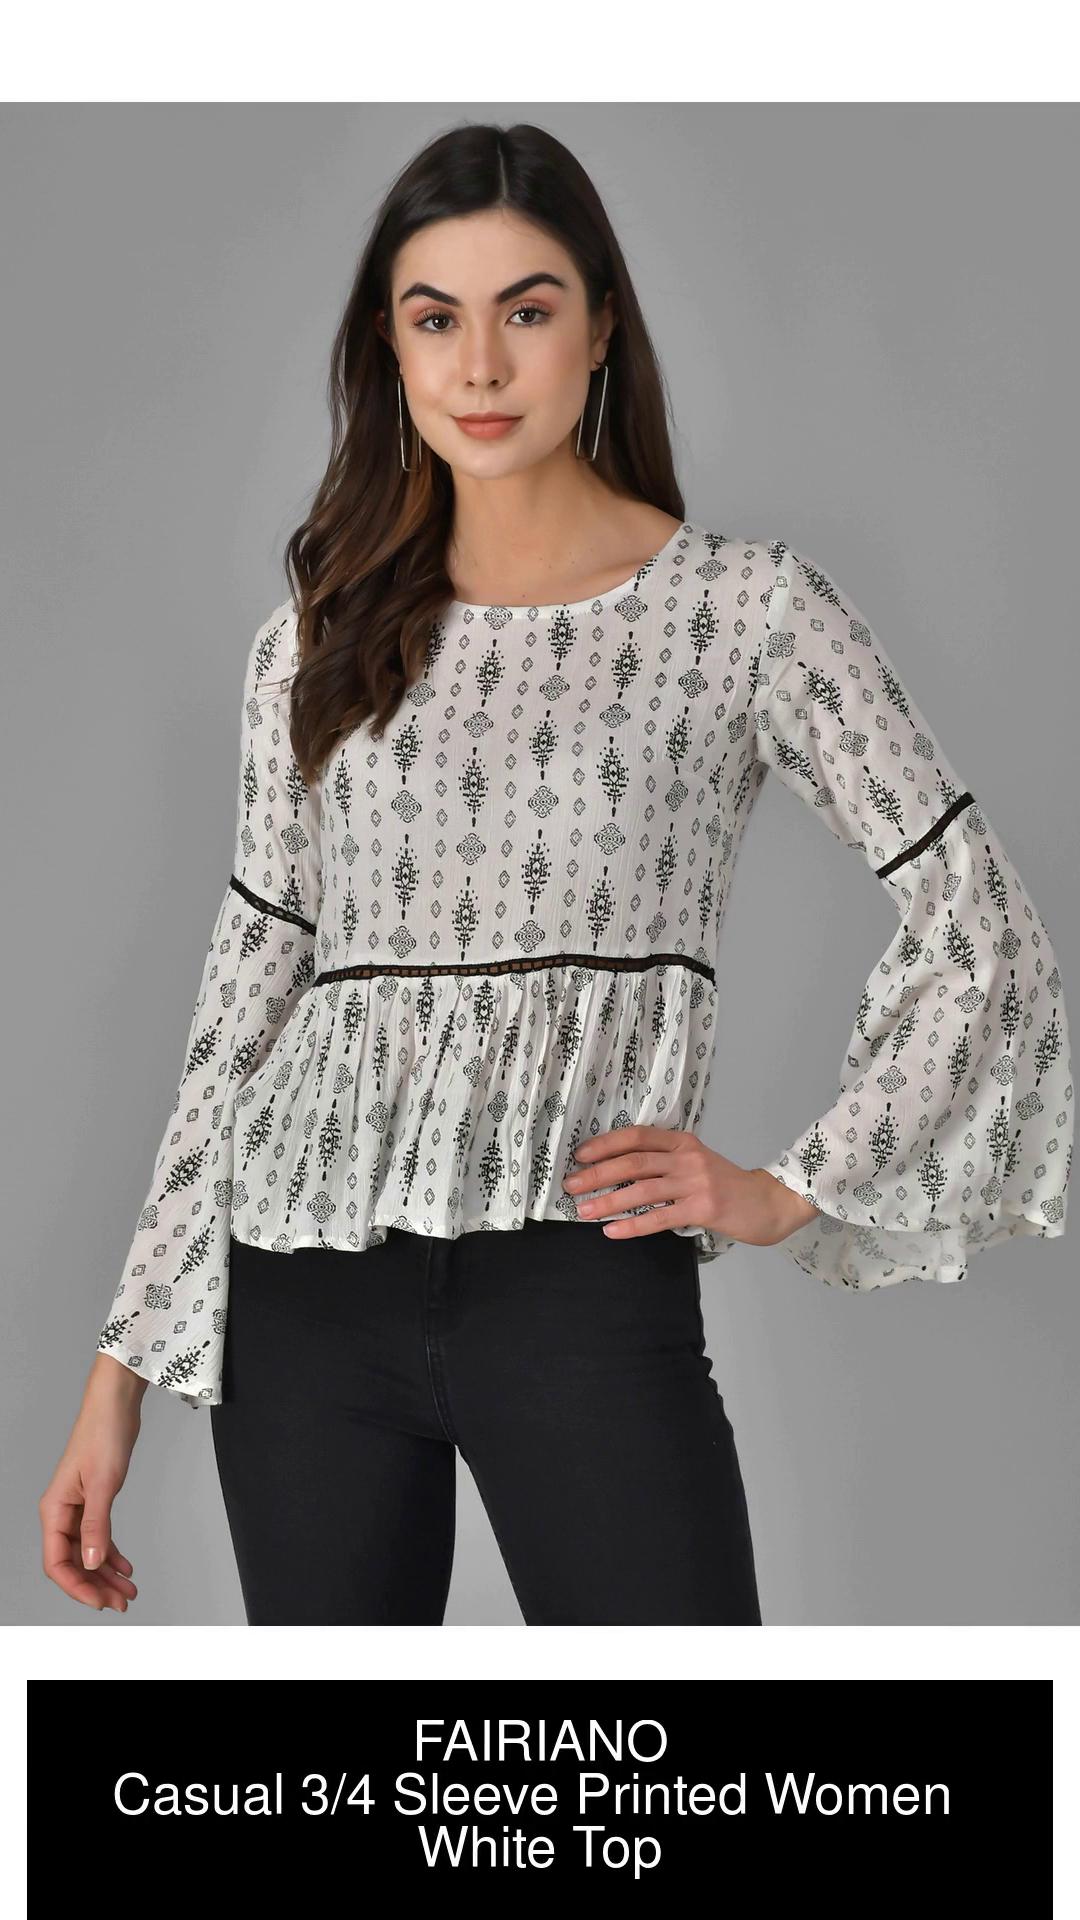 FAIRIANO Casual 3/4 Sleeve Printed Women White Top - Buy FAIRIANO Casual  3/4 Sleeve Printed Women White Top Online at Best Prices in India